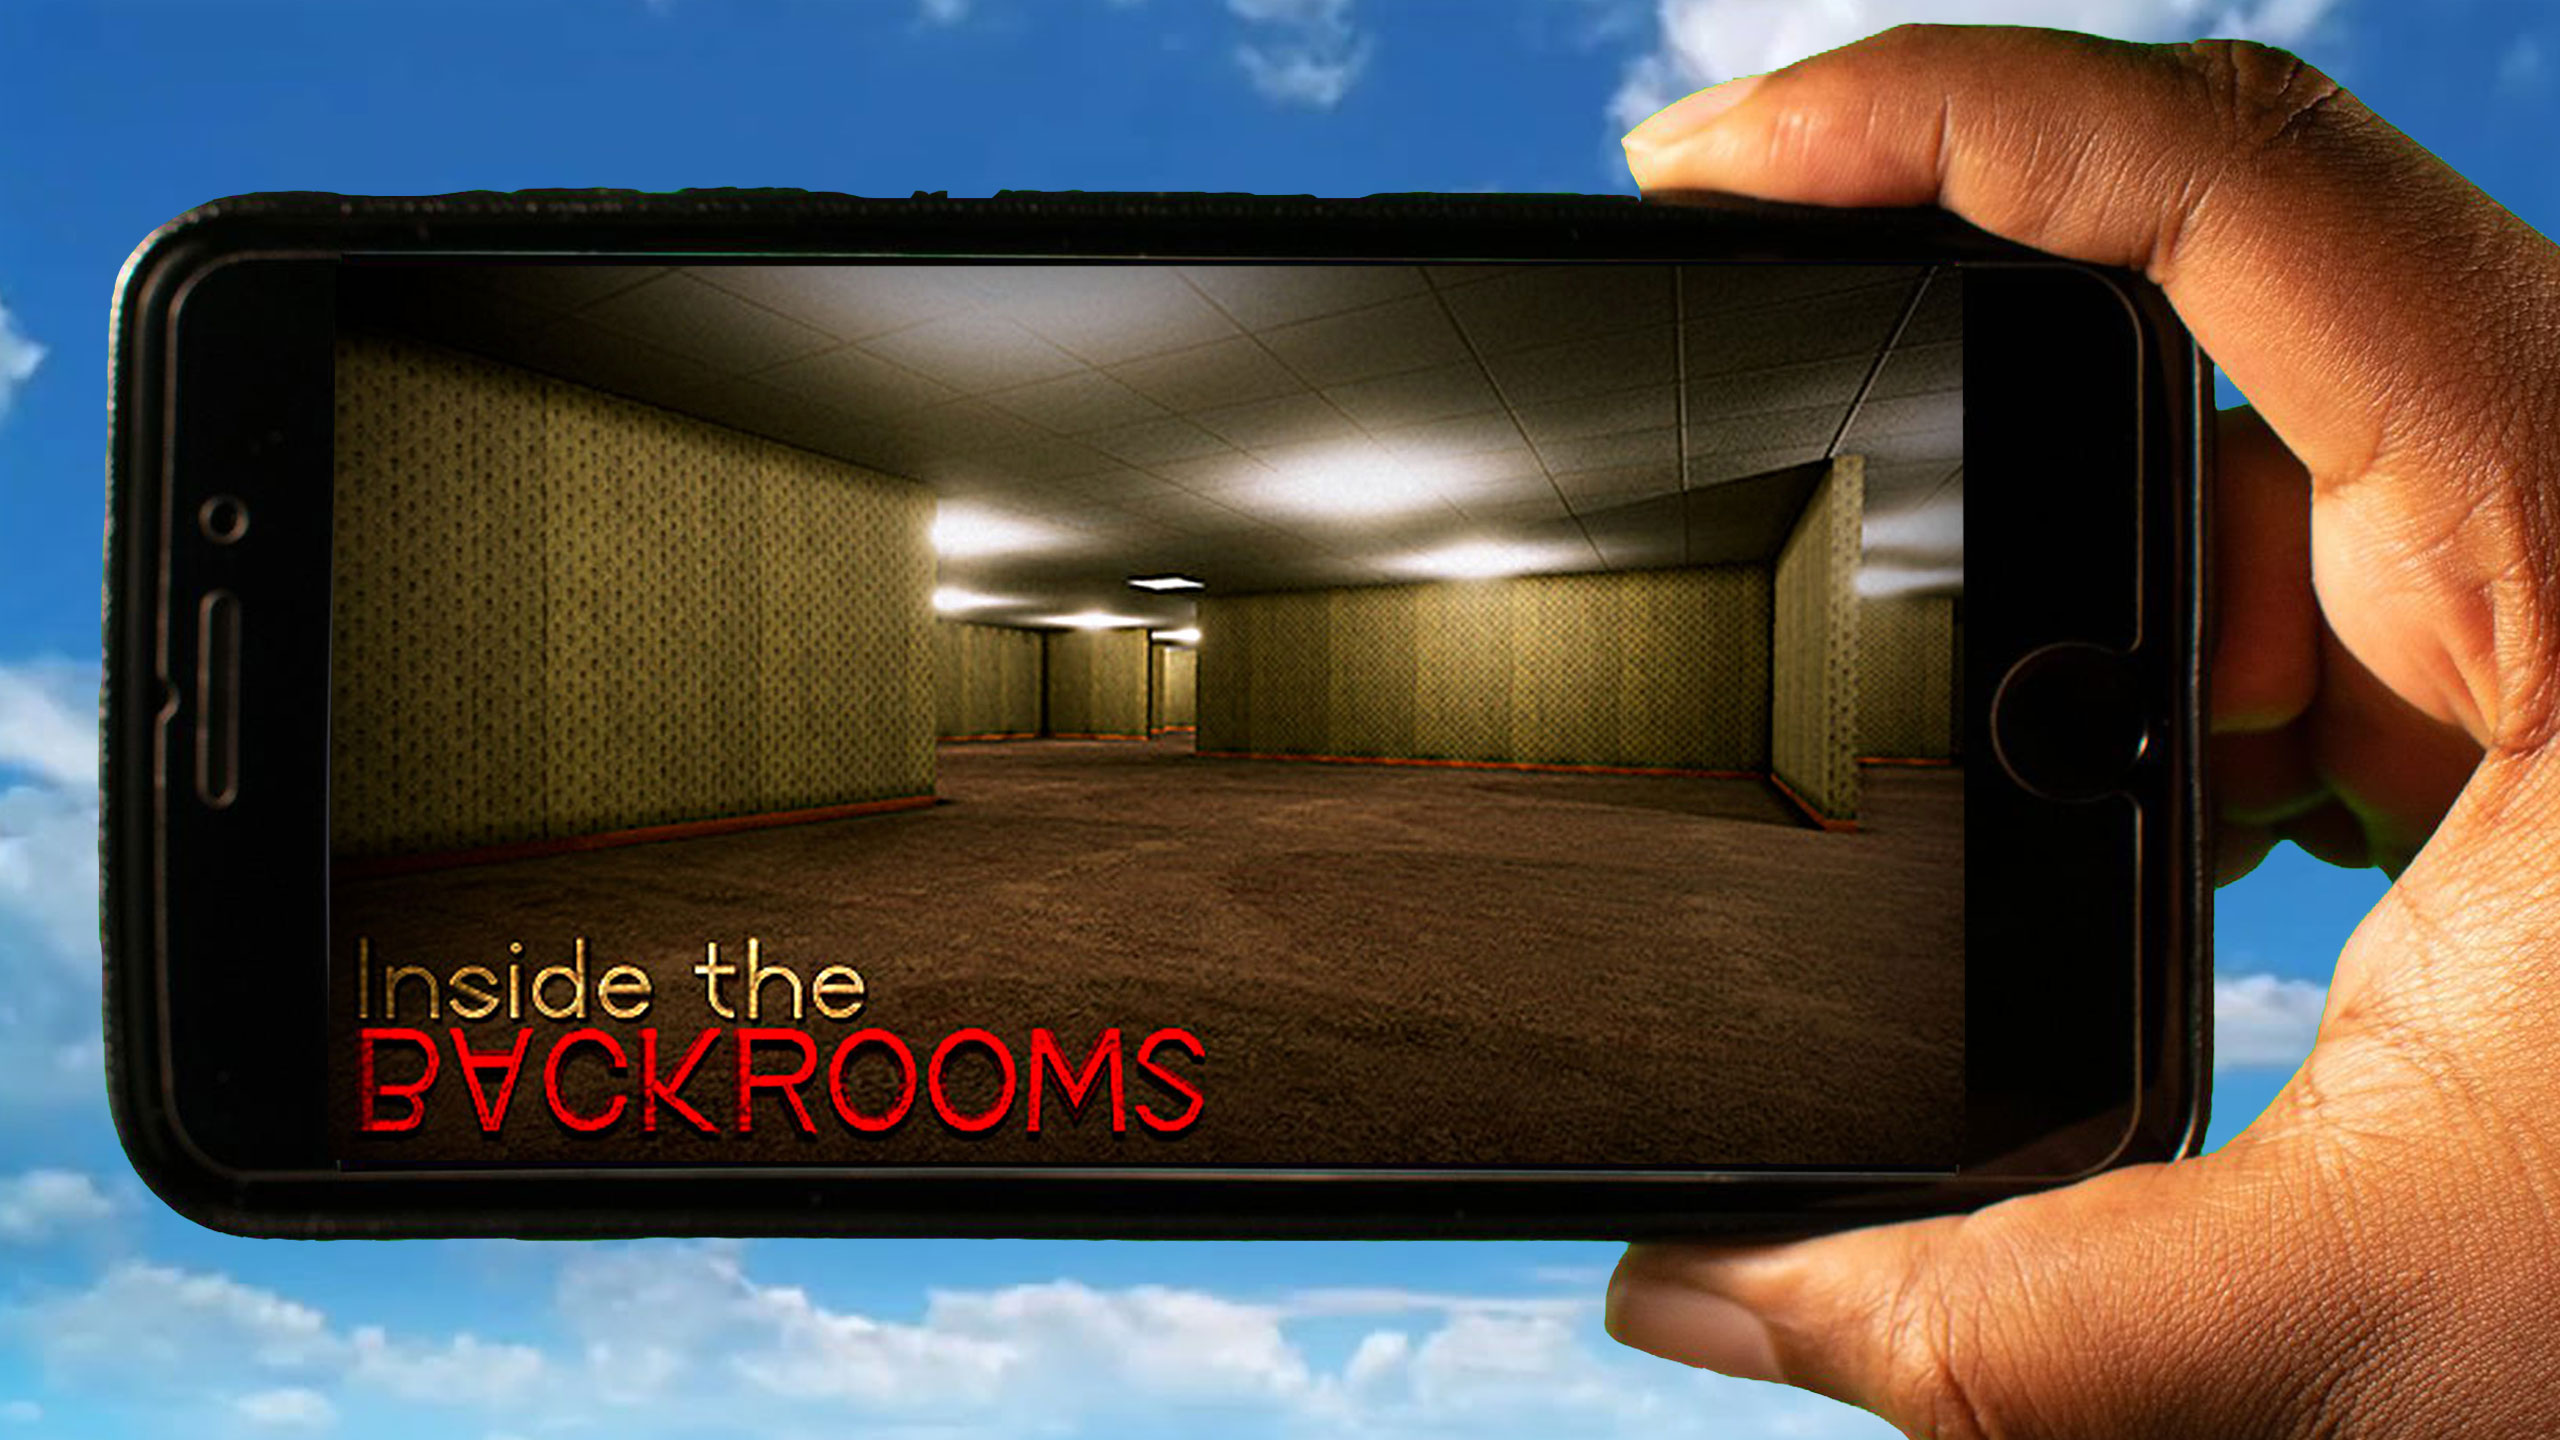 Can you play Inside the Backrooms on cloud gaming services?